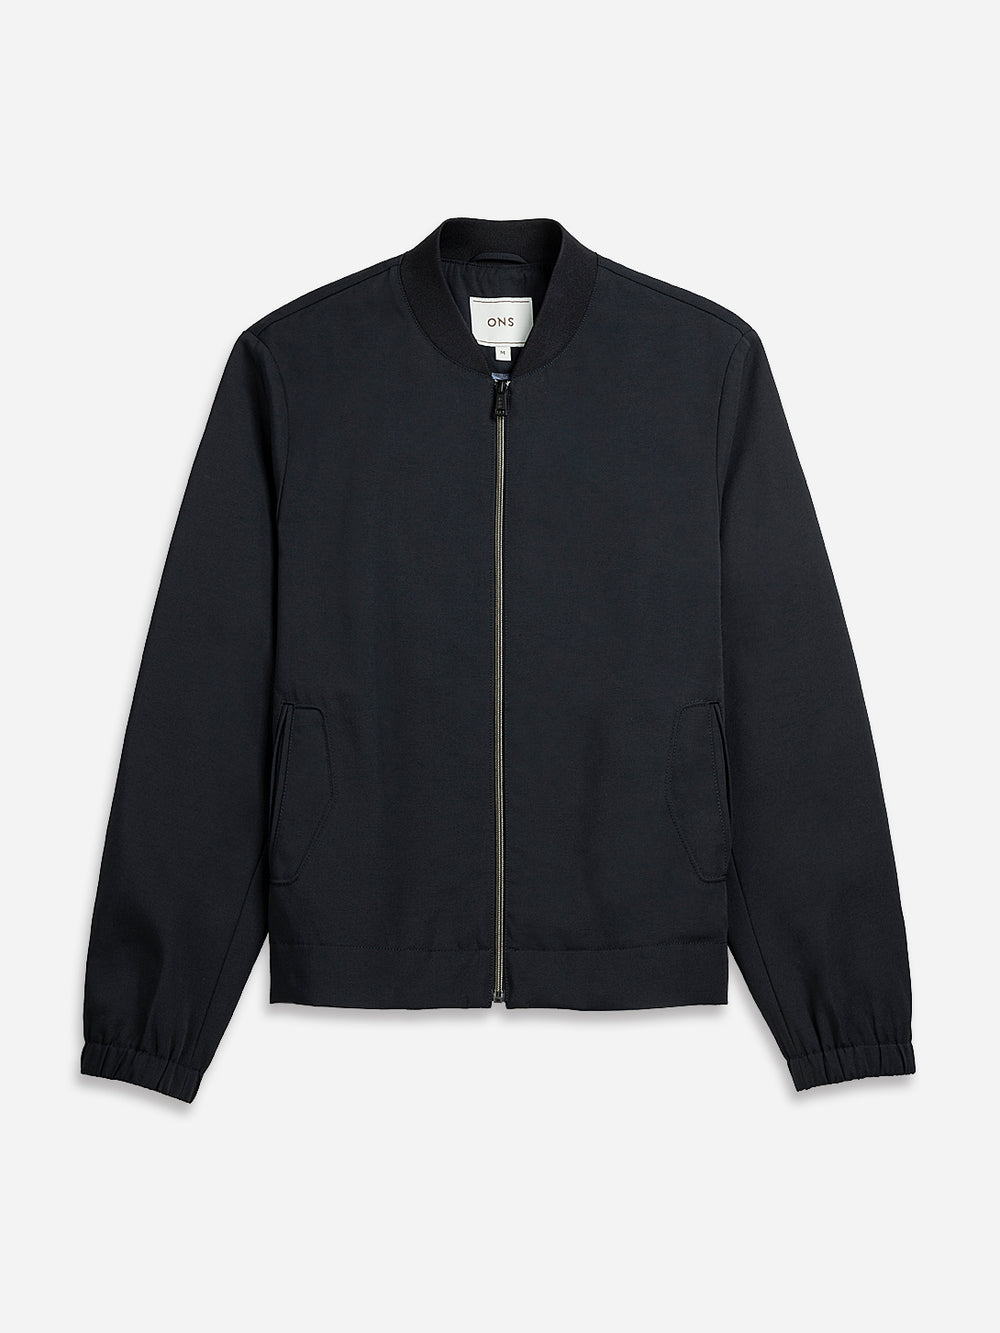 DK NAVY Dominic Bomber Twill Jacket Mens Summer Layering Outerwear